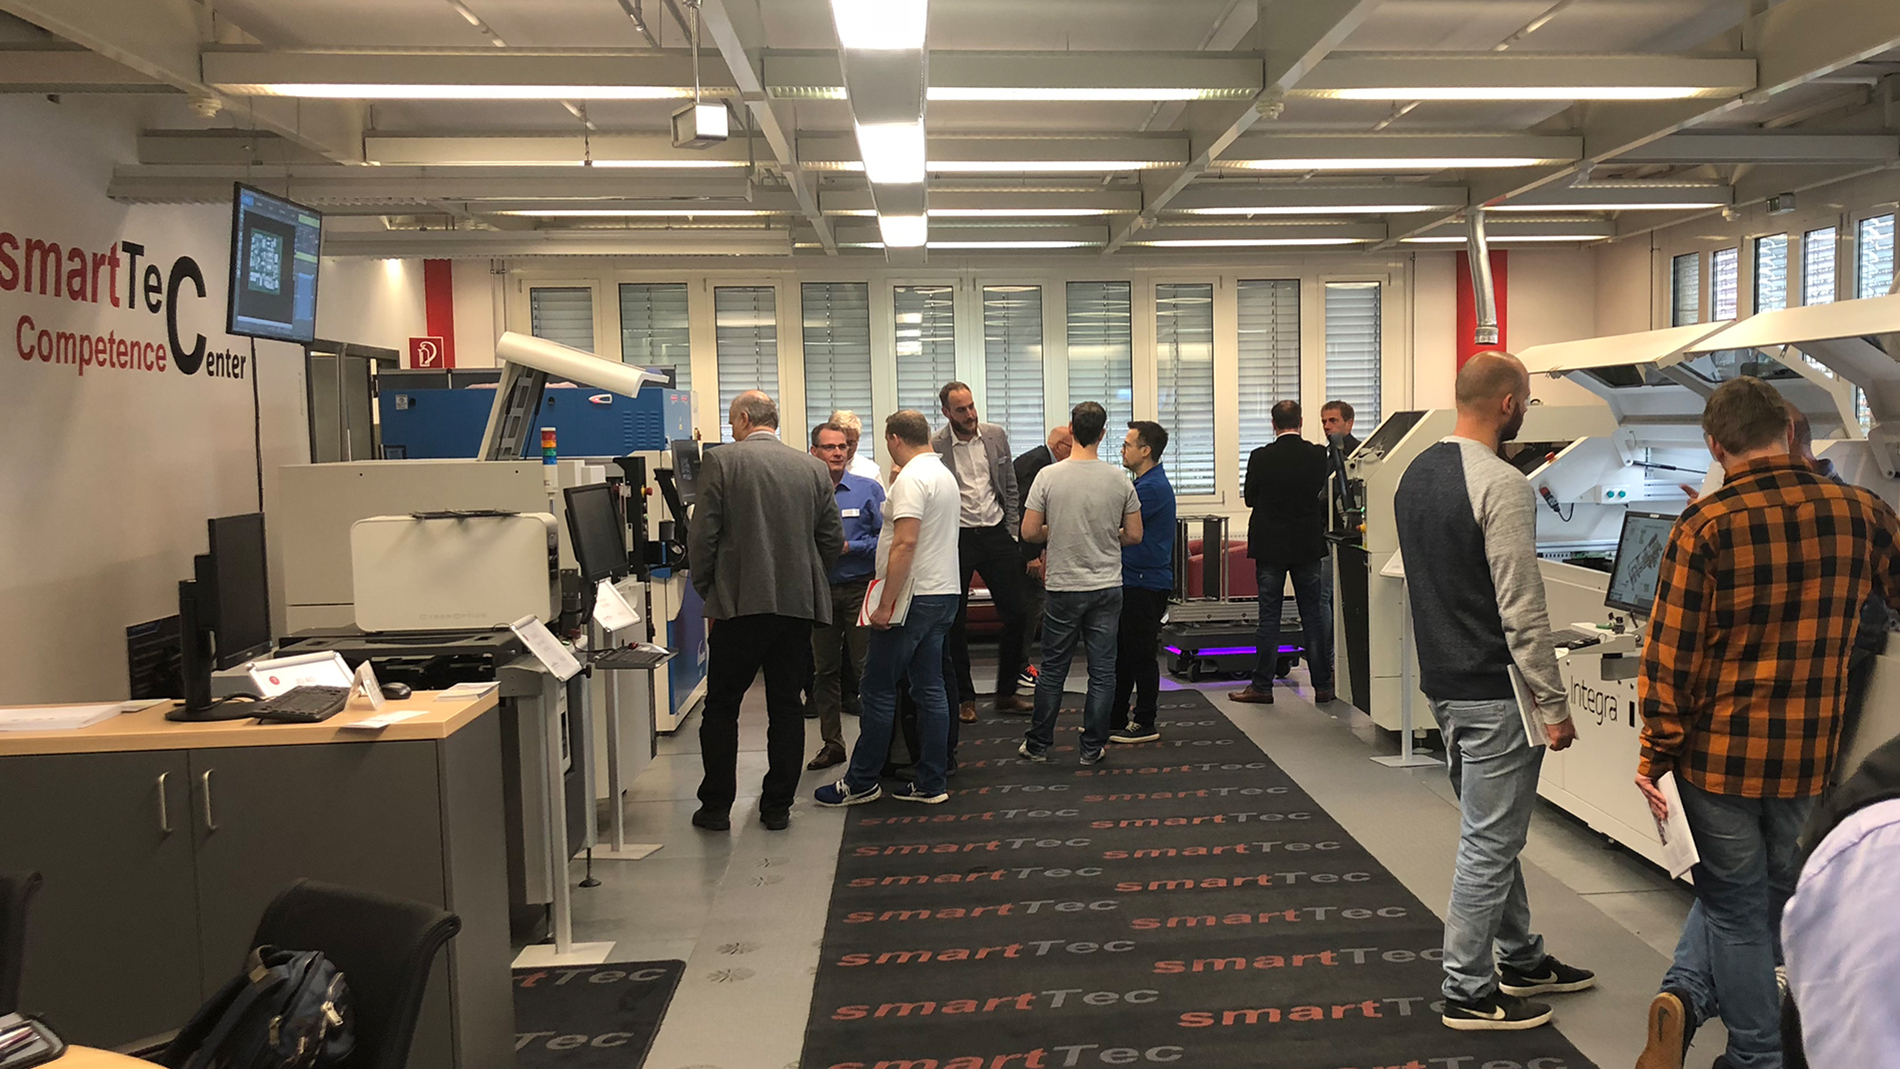 In the Competence Center, virtually all processes of electronics manufacturing are evaluated, and demos and tests are carried out with expert support process development. (Photo: smartTec GmbH)